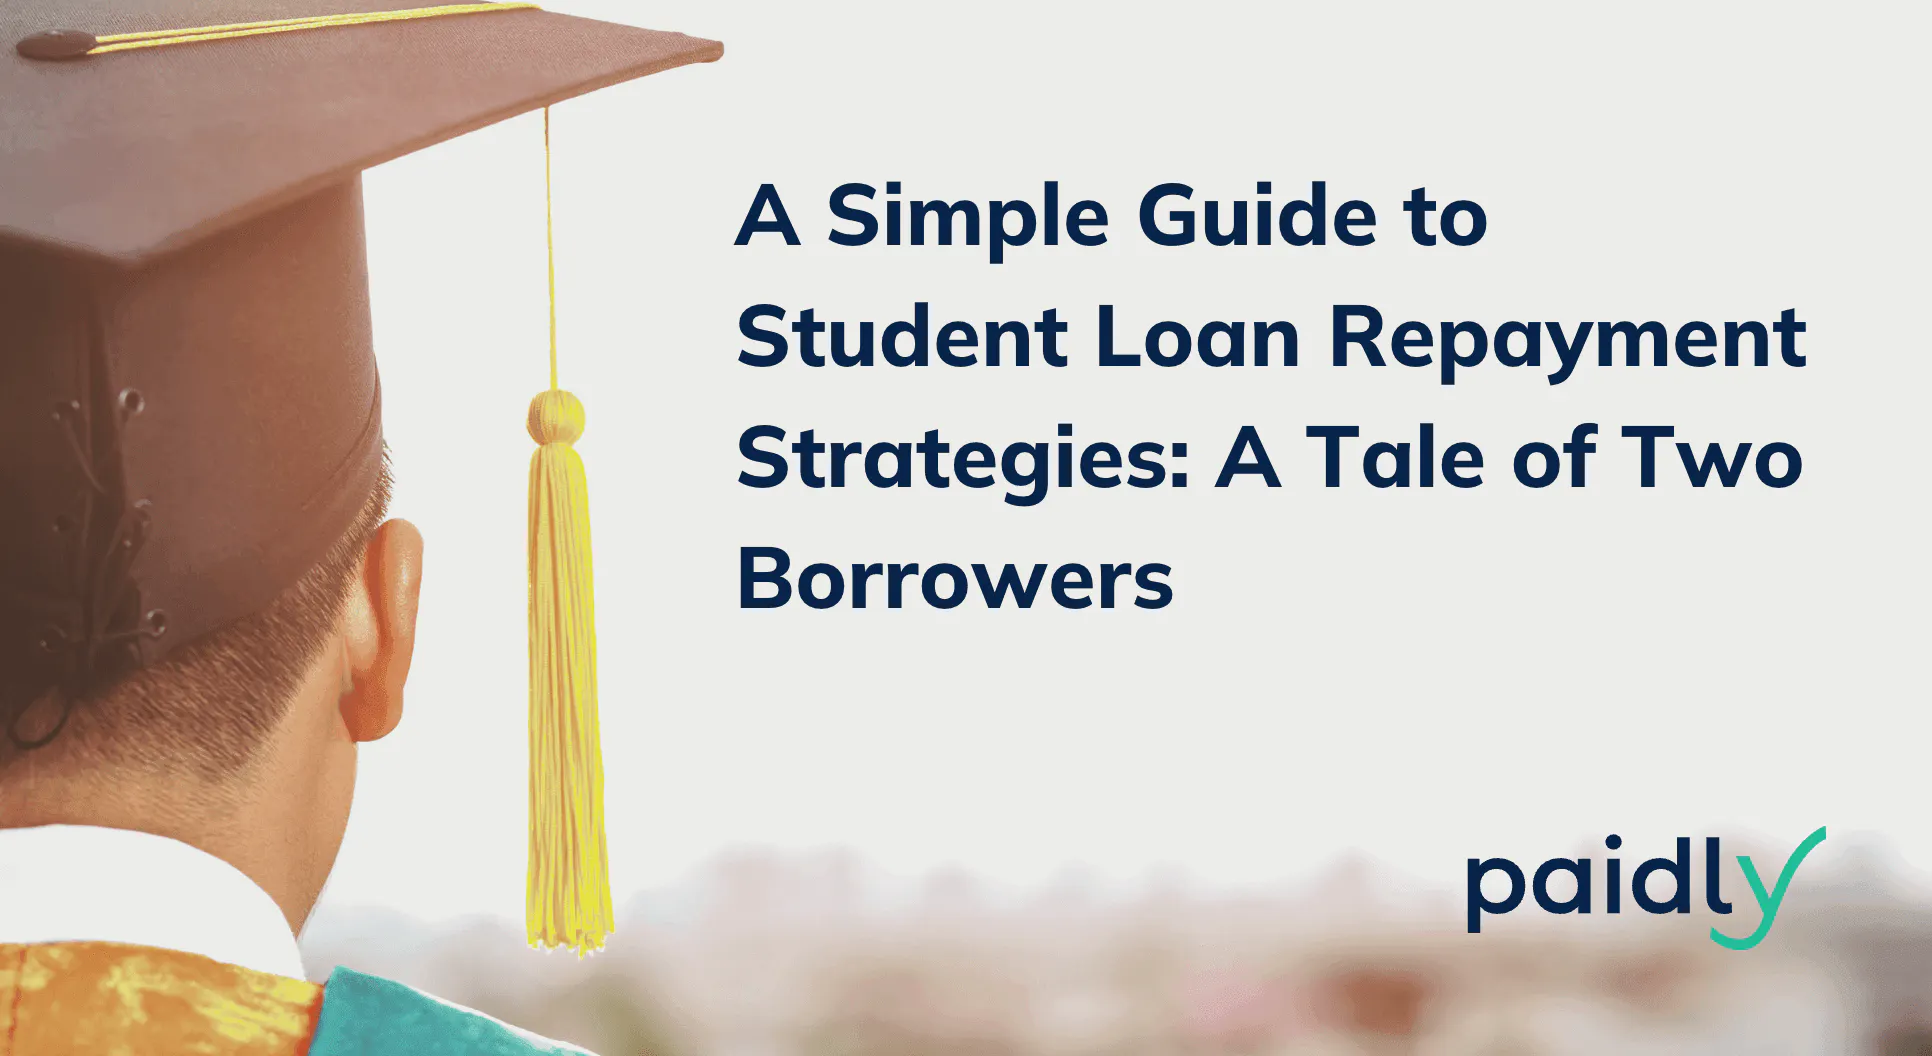 A simple guide to student loan repayment strategies: a tale of two borrowers